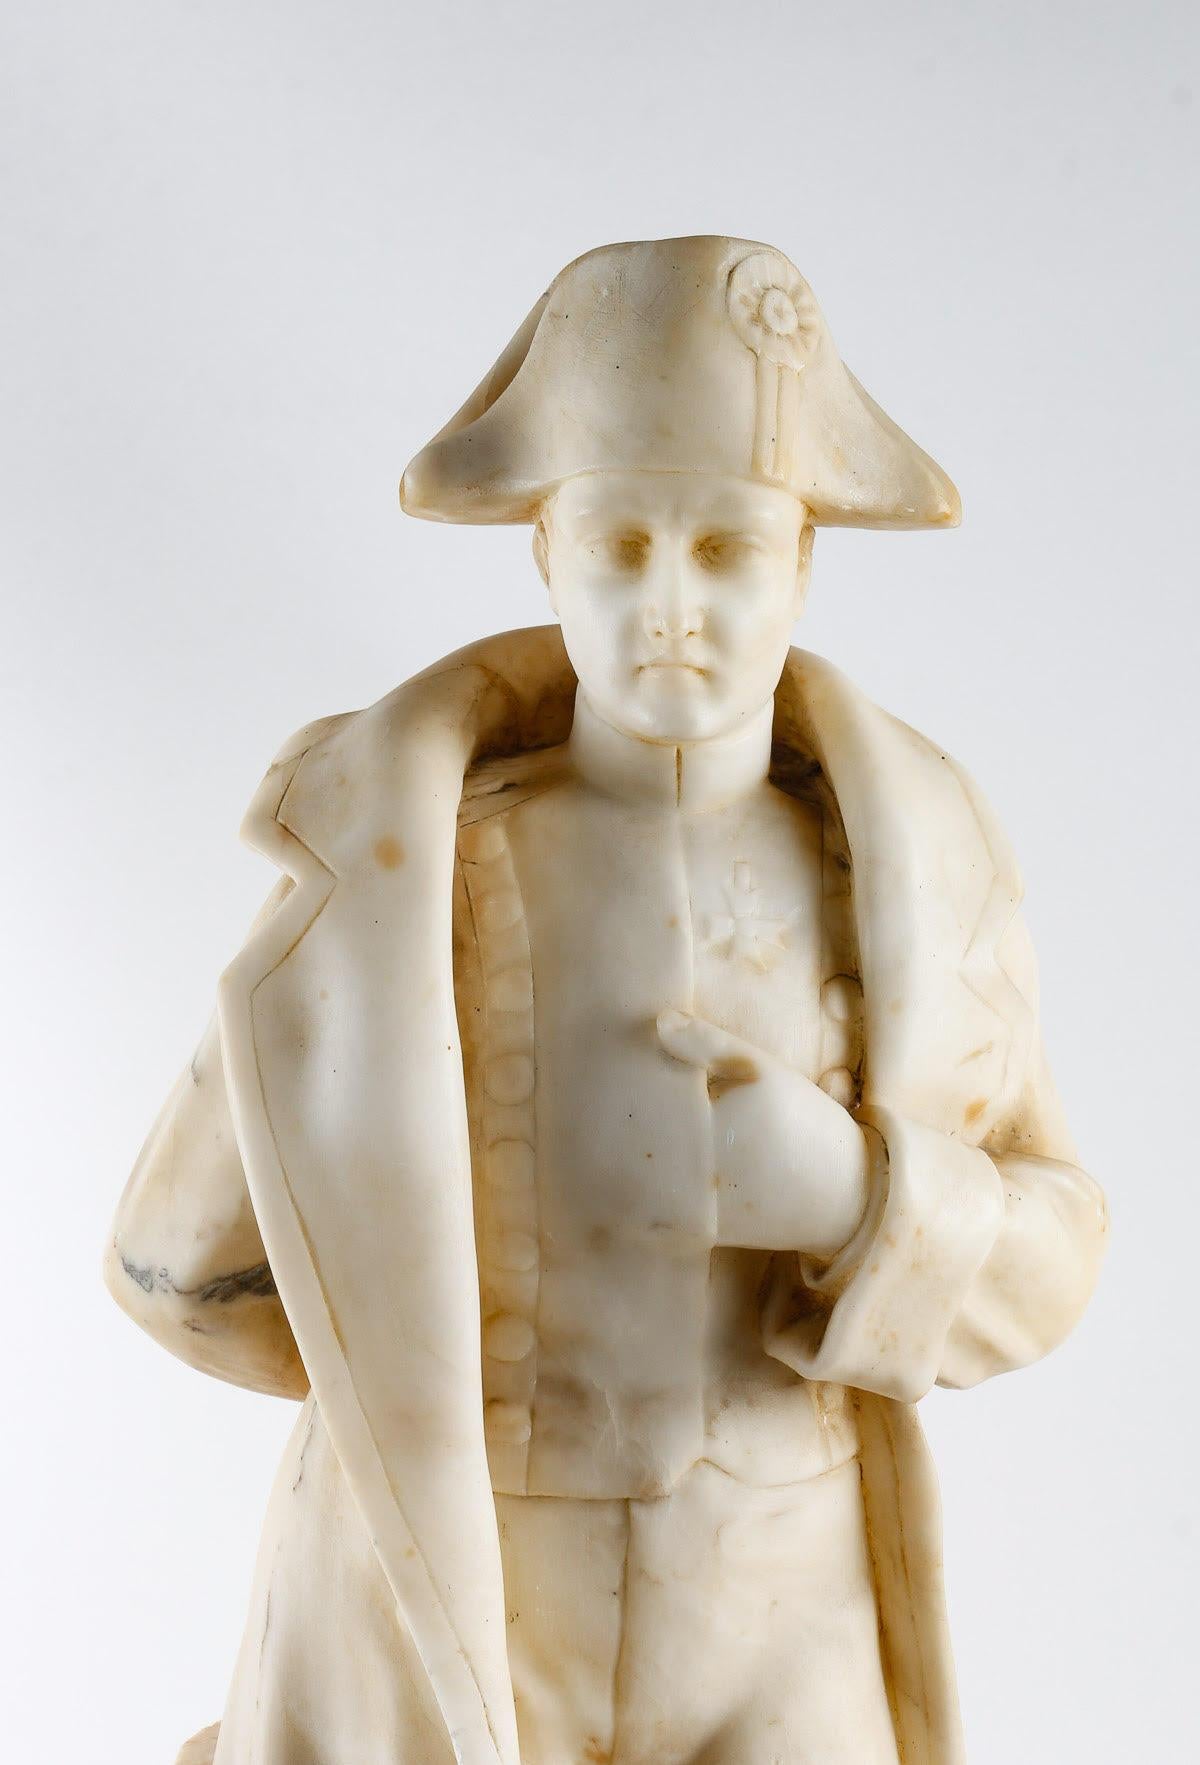 Sculpture of Napoleon in alabaster, Early 20th century.

Statue, alabaster sculpture of Napoleon, early 20th century.    
h: 65cm , w: 21cm, d: 18cm